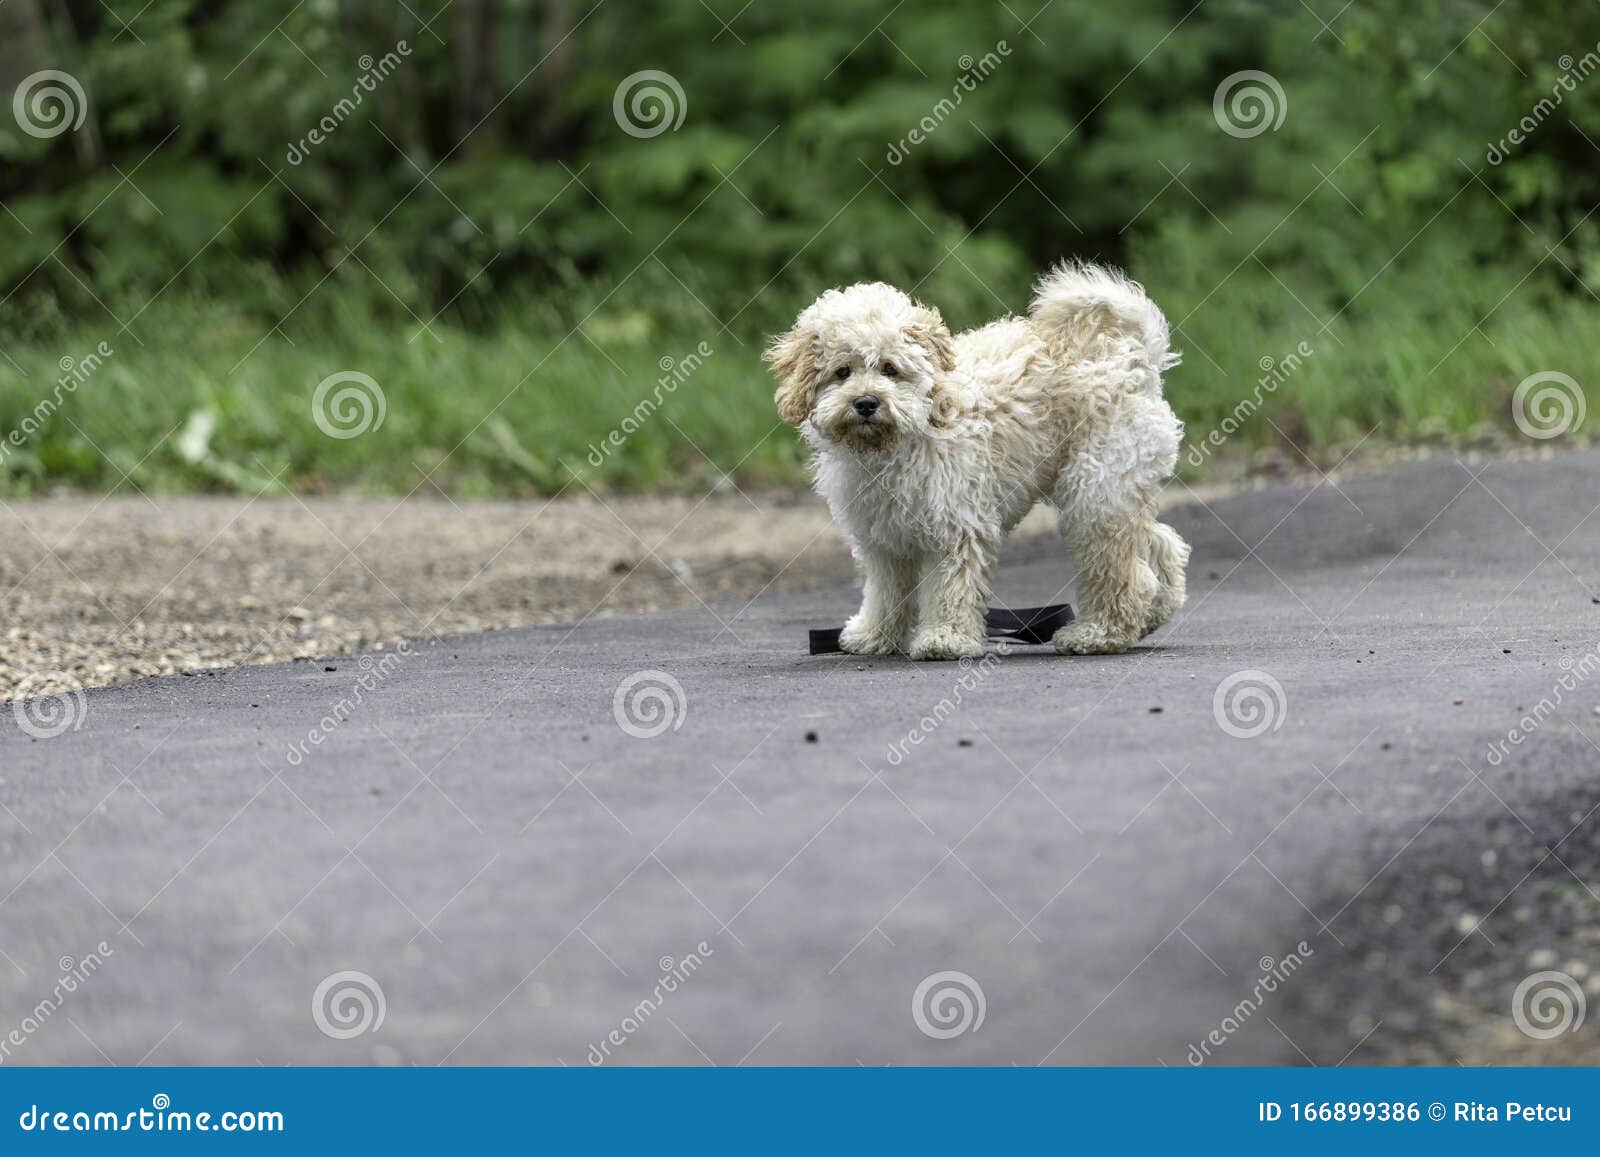 Adorable Maltipoo Dog In The Park Stock Photo Image Of Fuzzy Breed 166899386